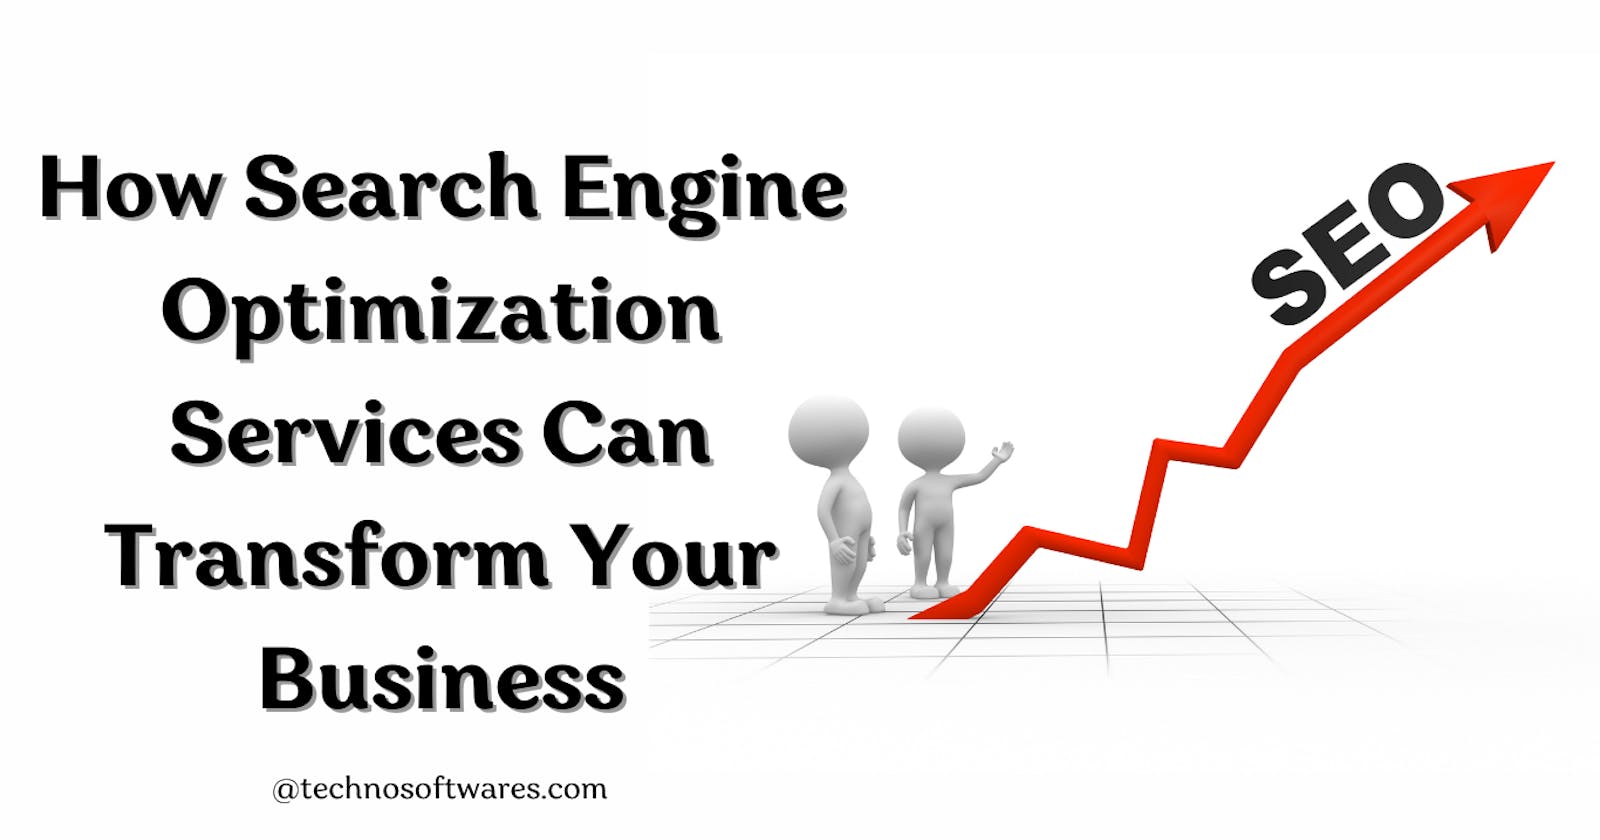 How Search Engine Optimization Services Can Transform Your Business?